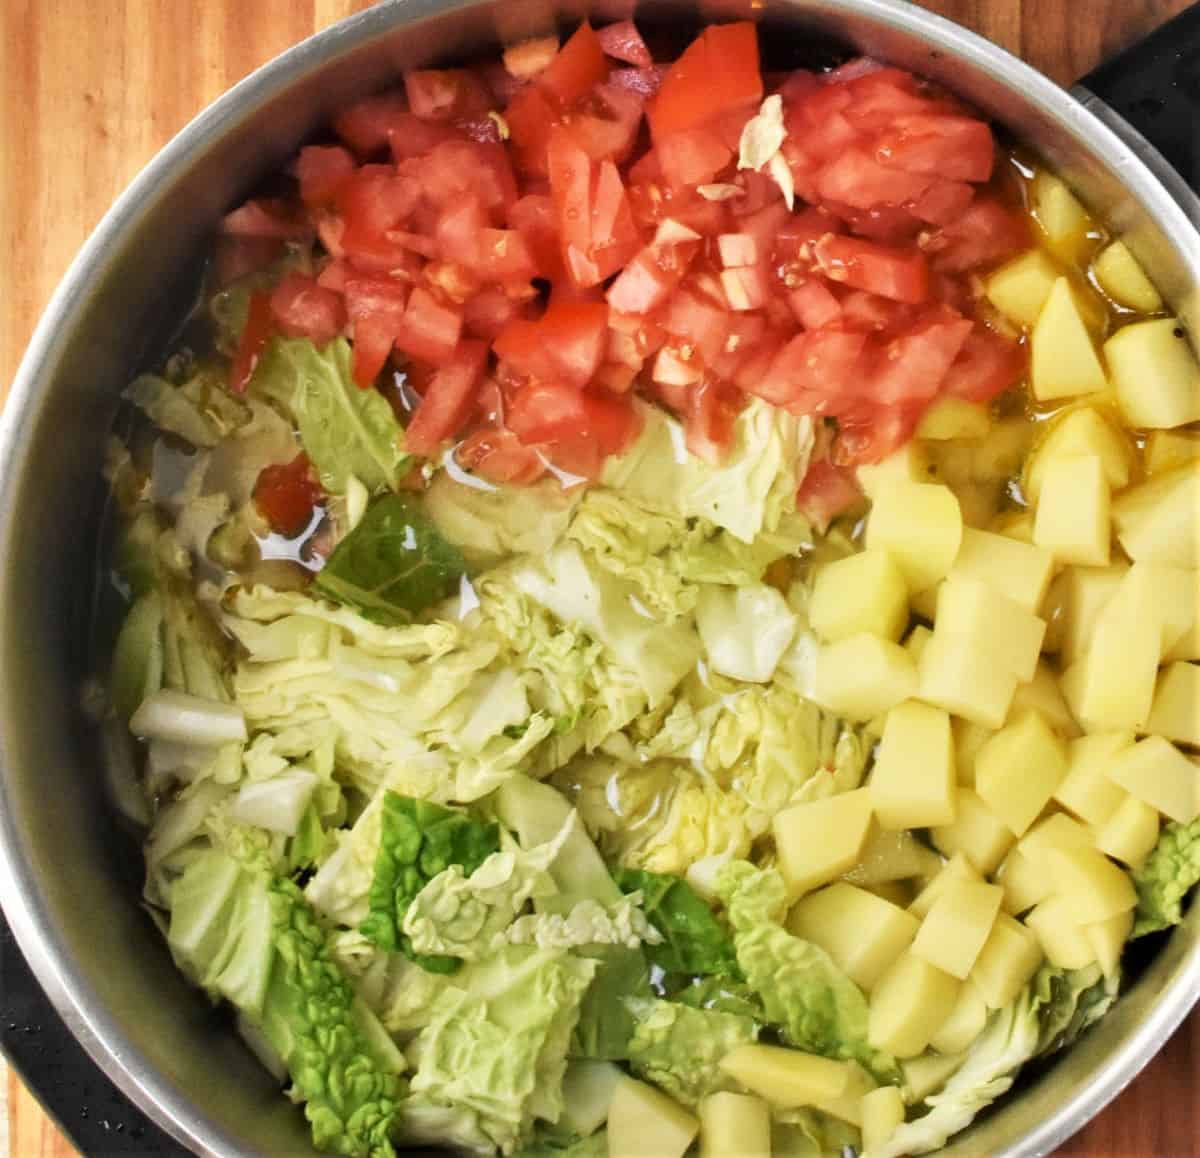 Dices tomato, potatoes and shredded cabbage in large pot.